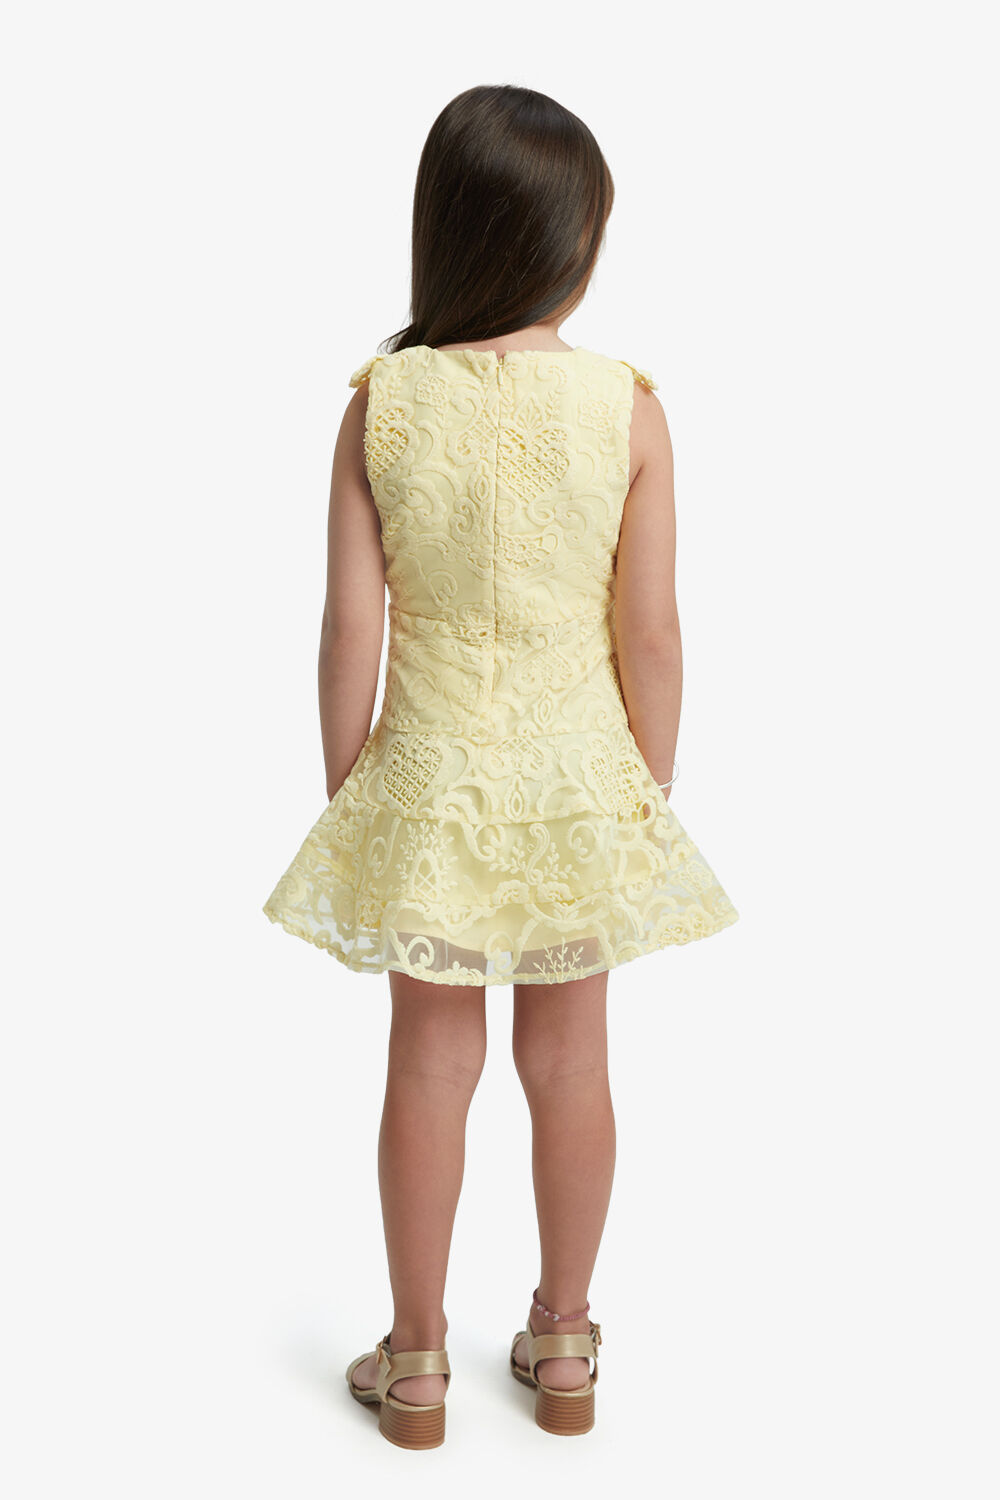 SADIE LACE DRESS in colour LIMELIGHT